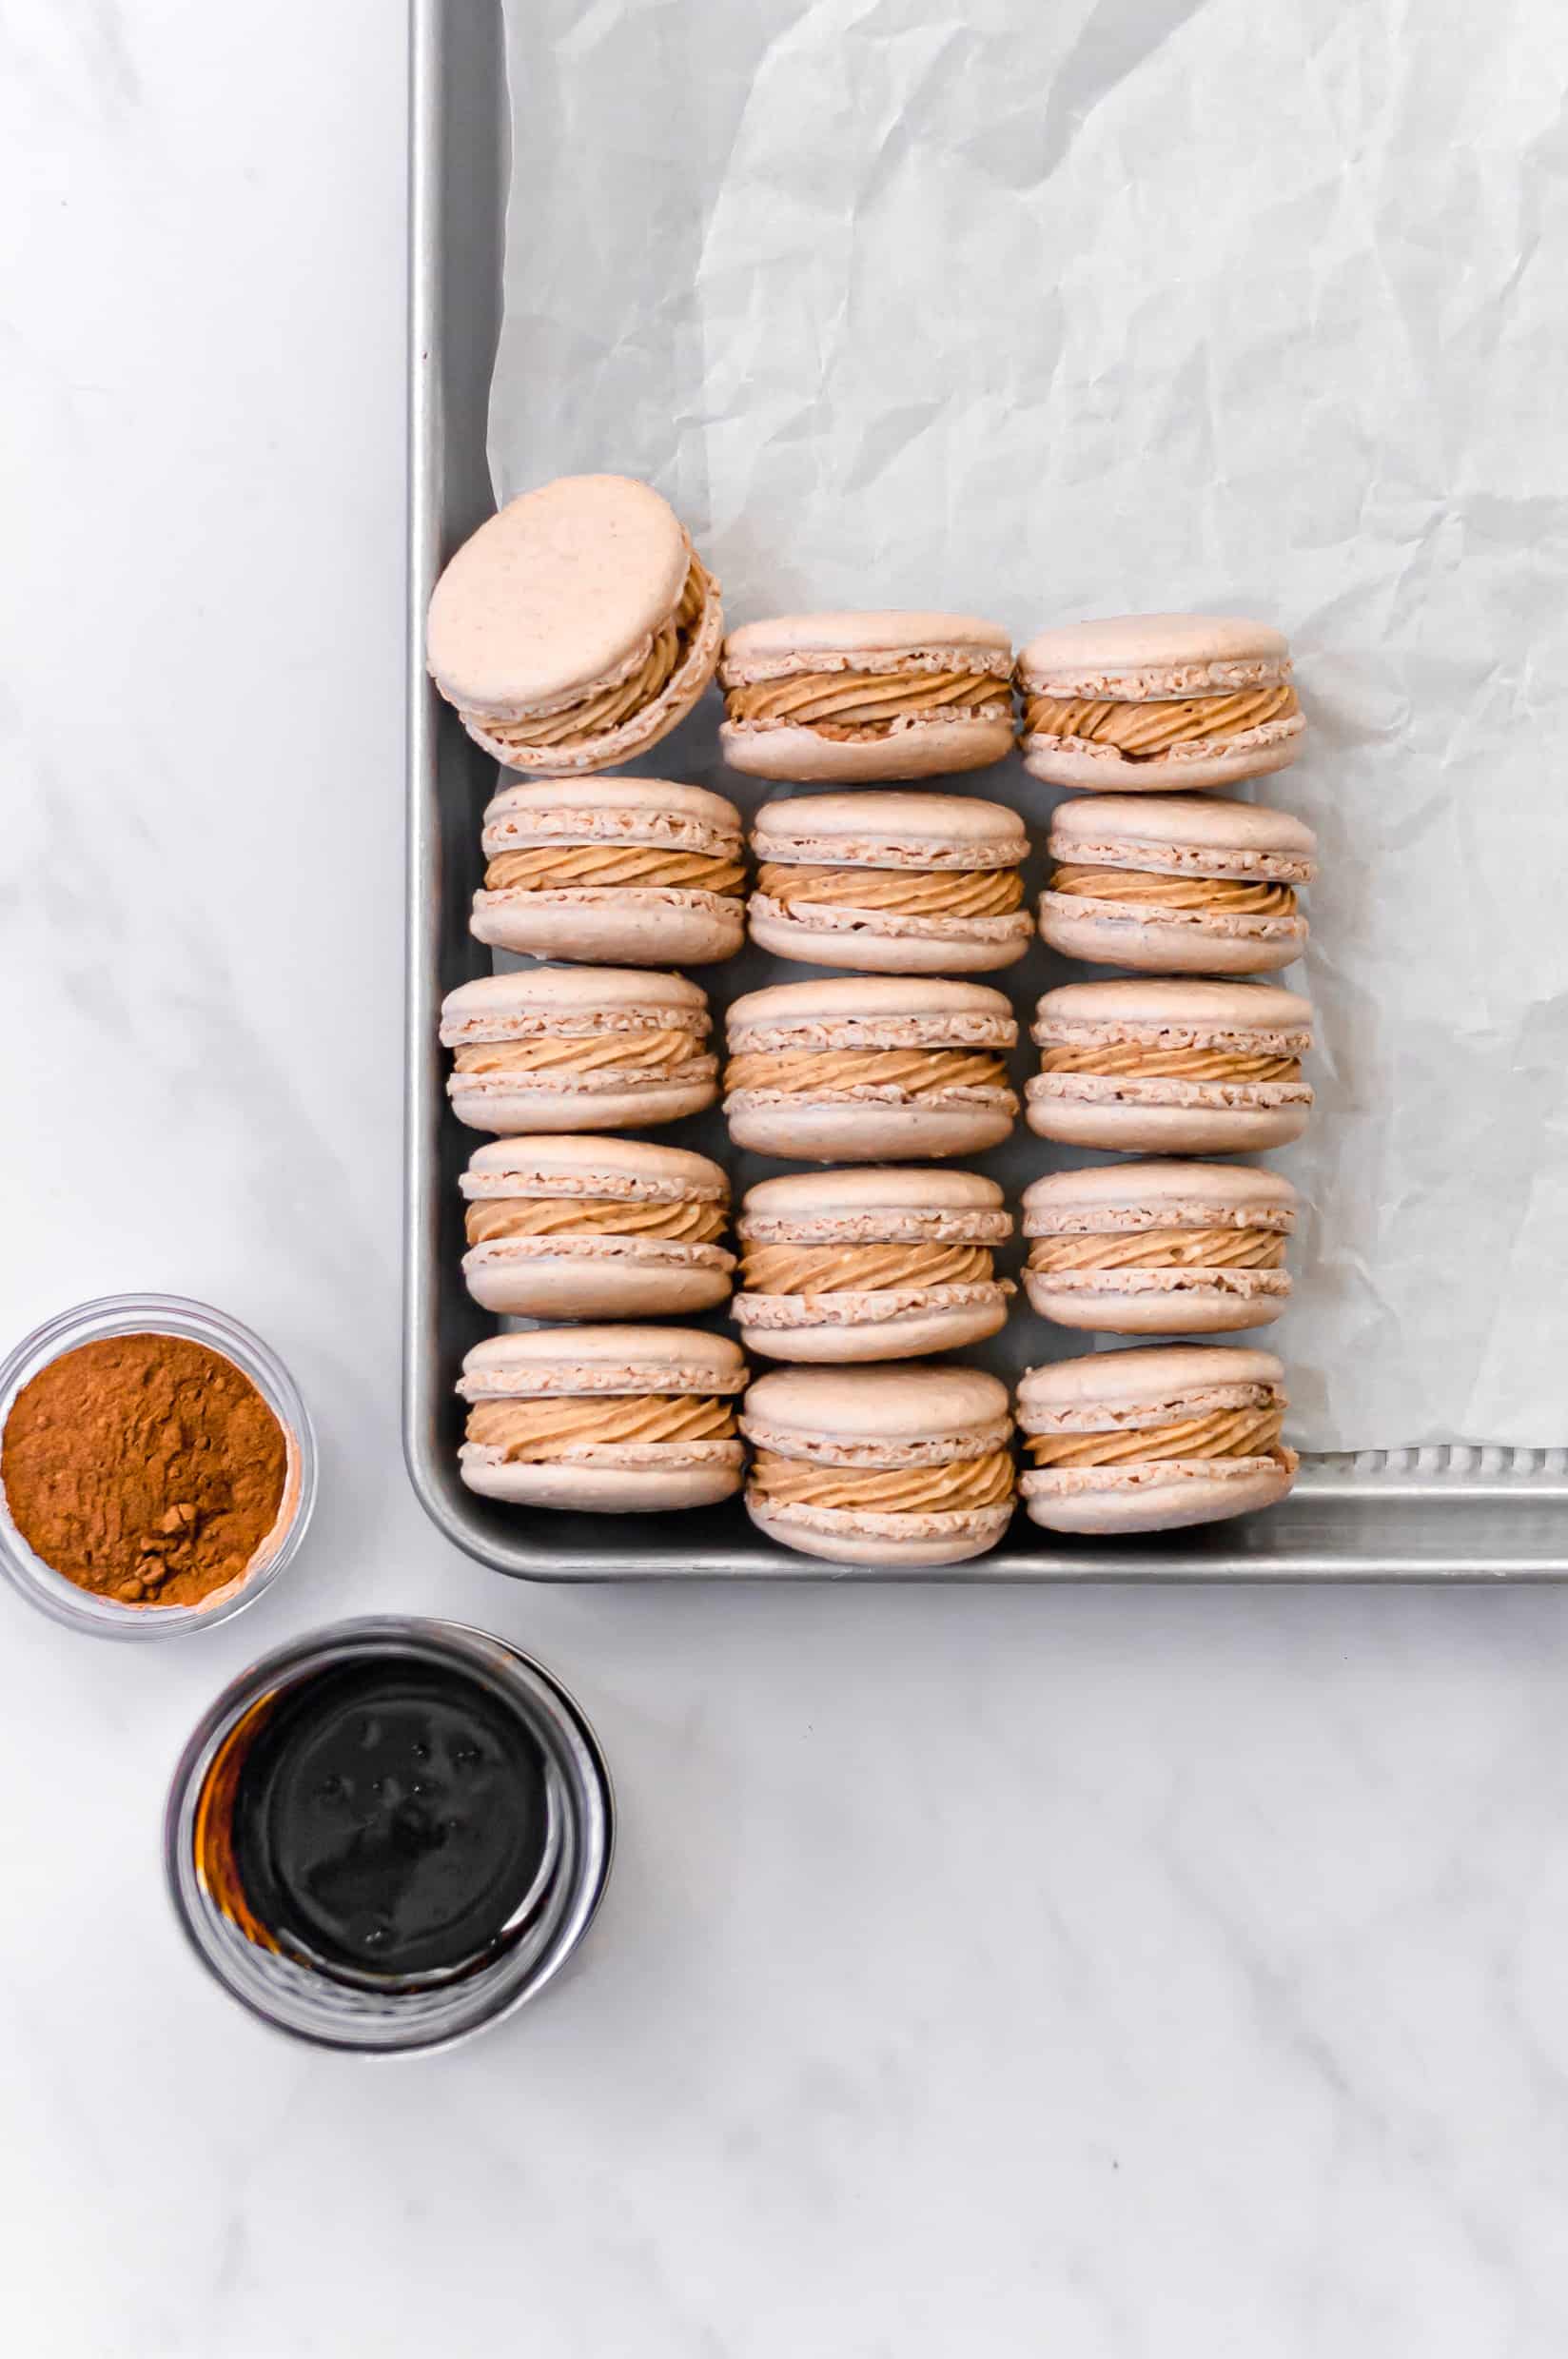 spiced macarons assembled neatly  on a baking tray.